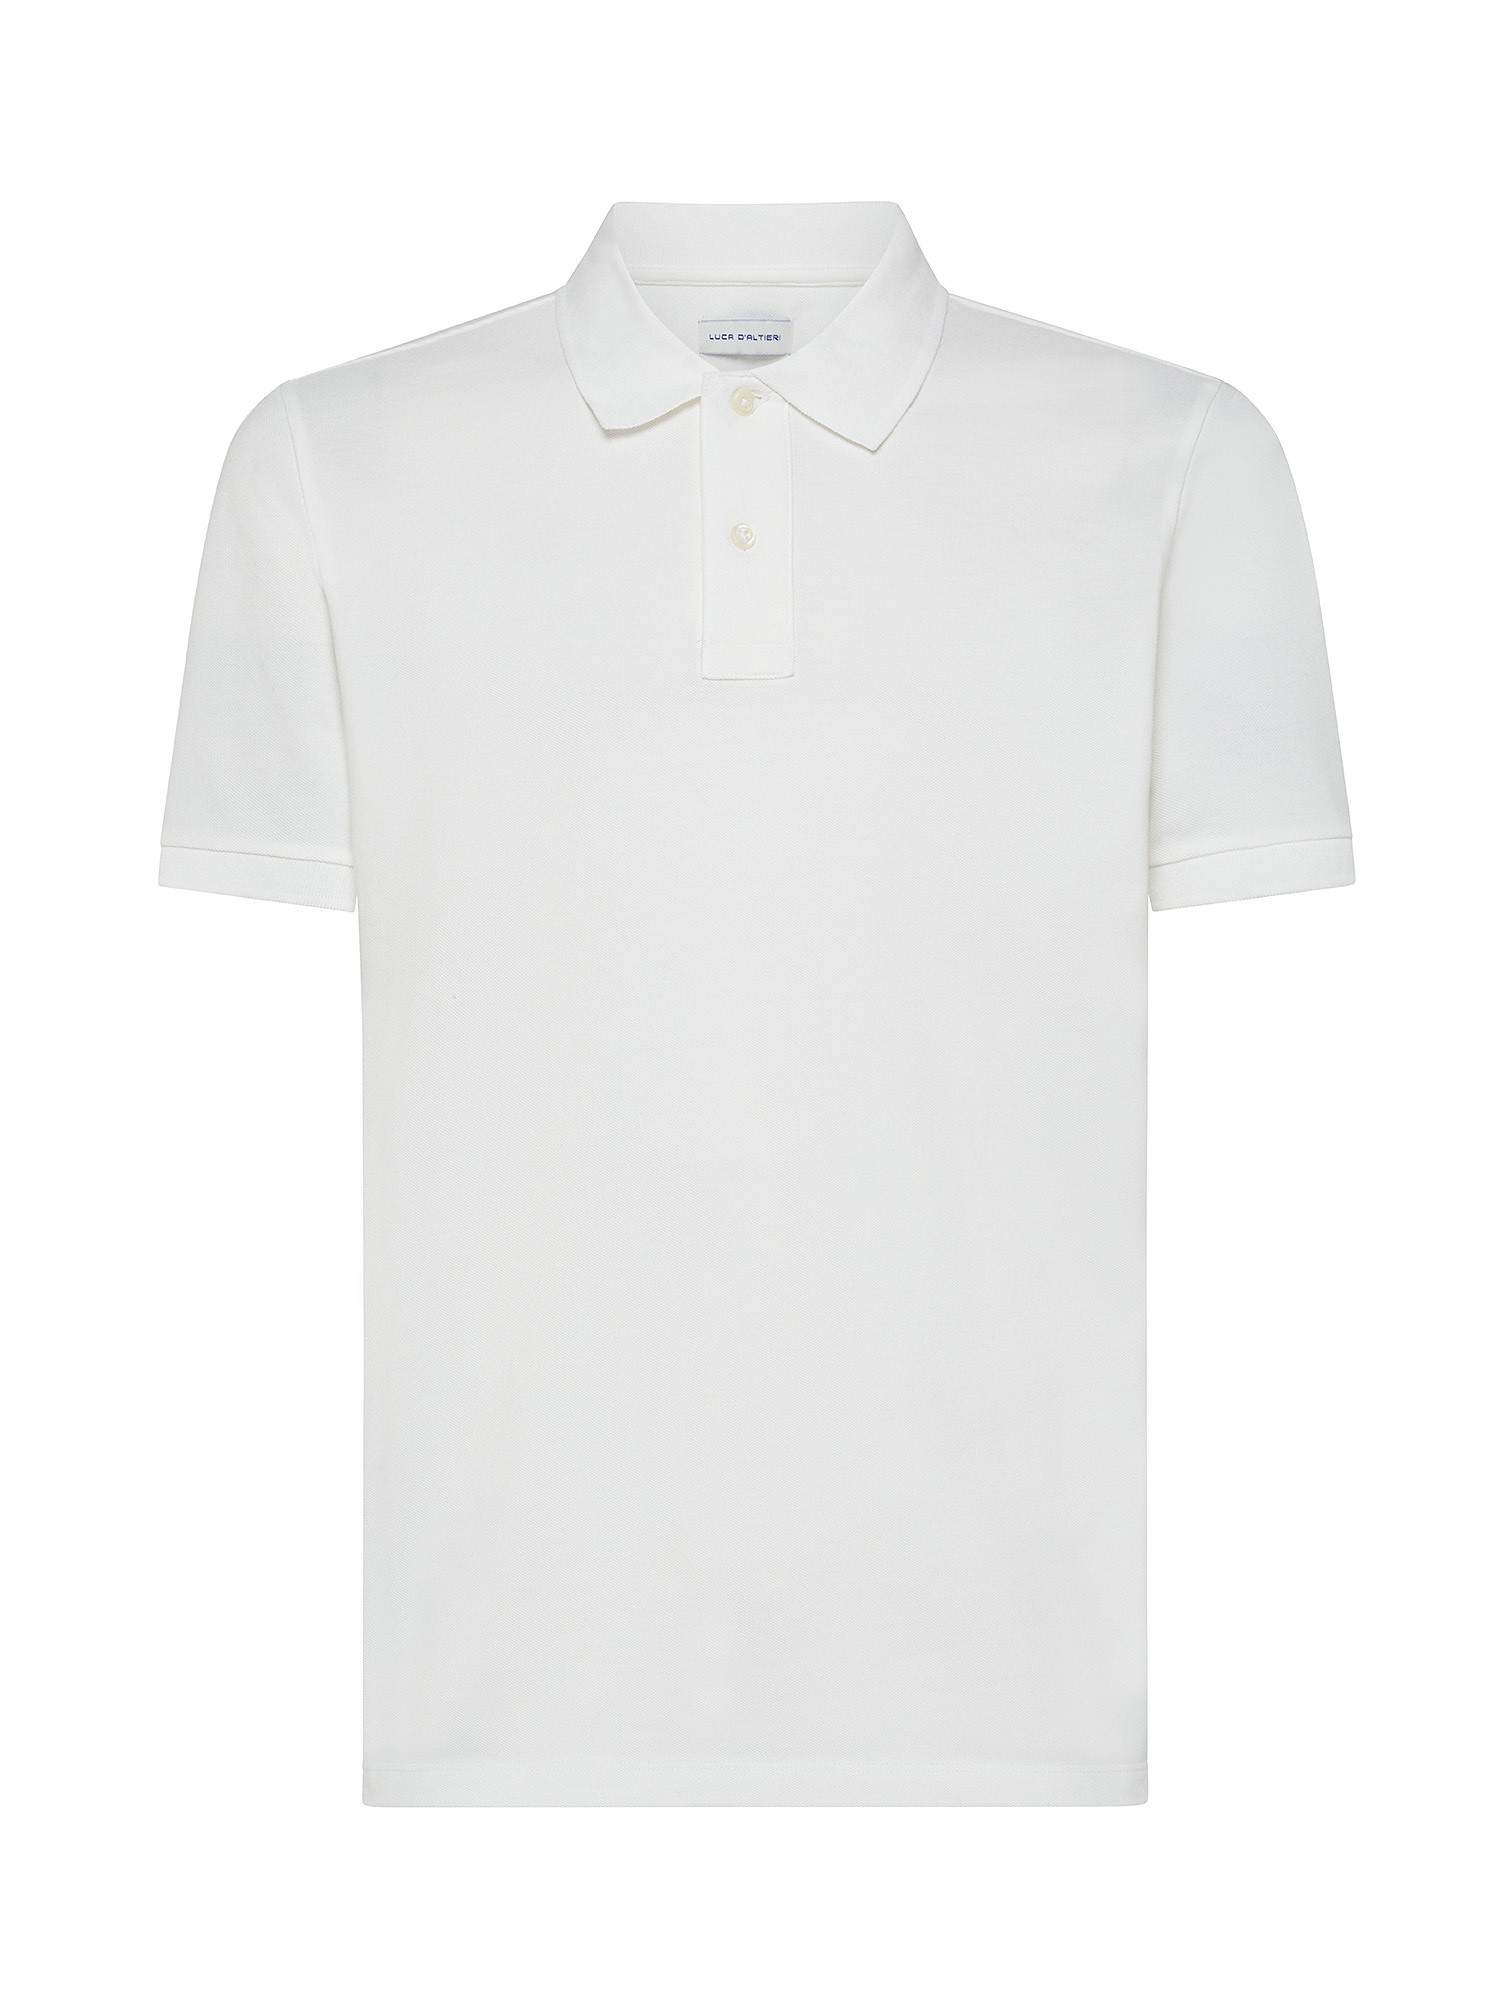 Luca D'Altieri - Polo in pure cotton, White, large image number 0